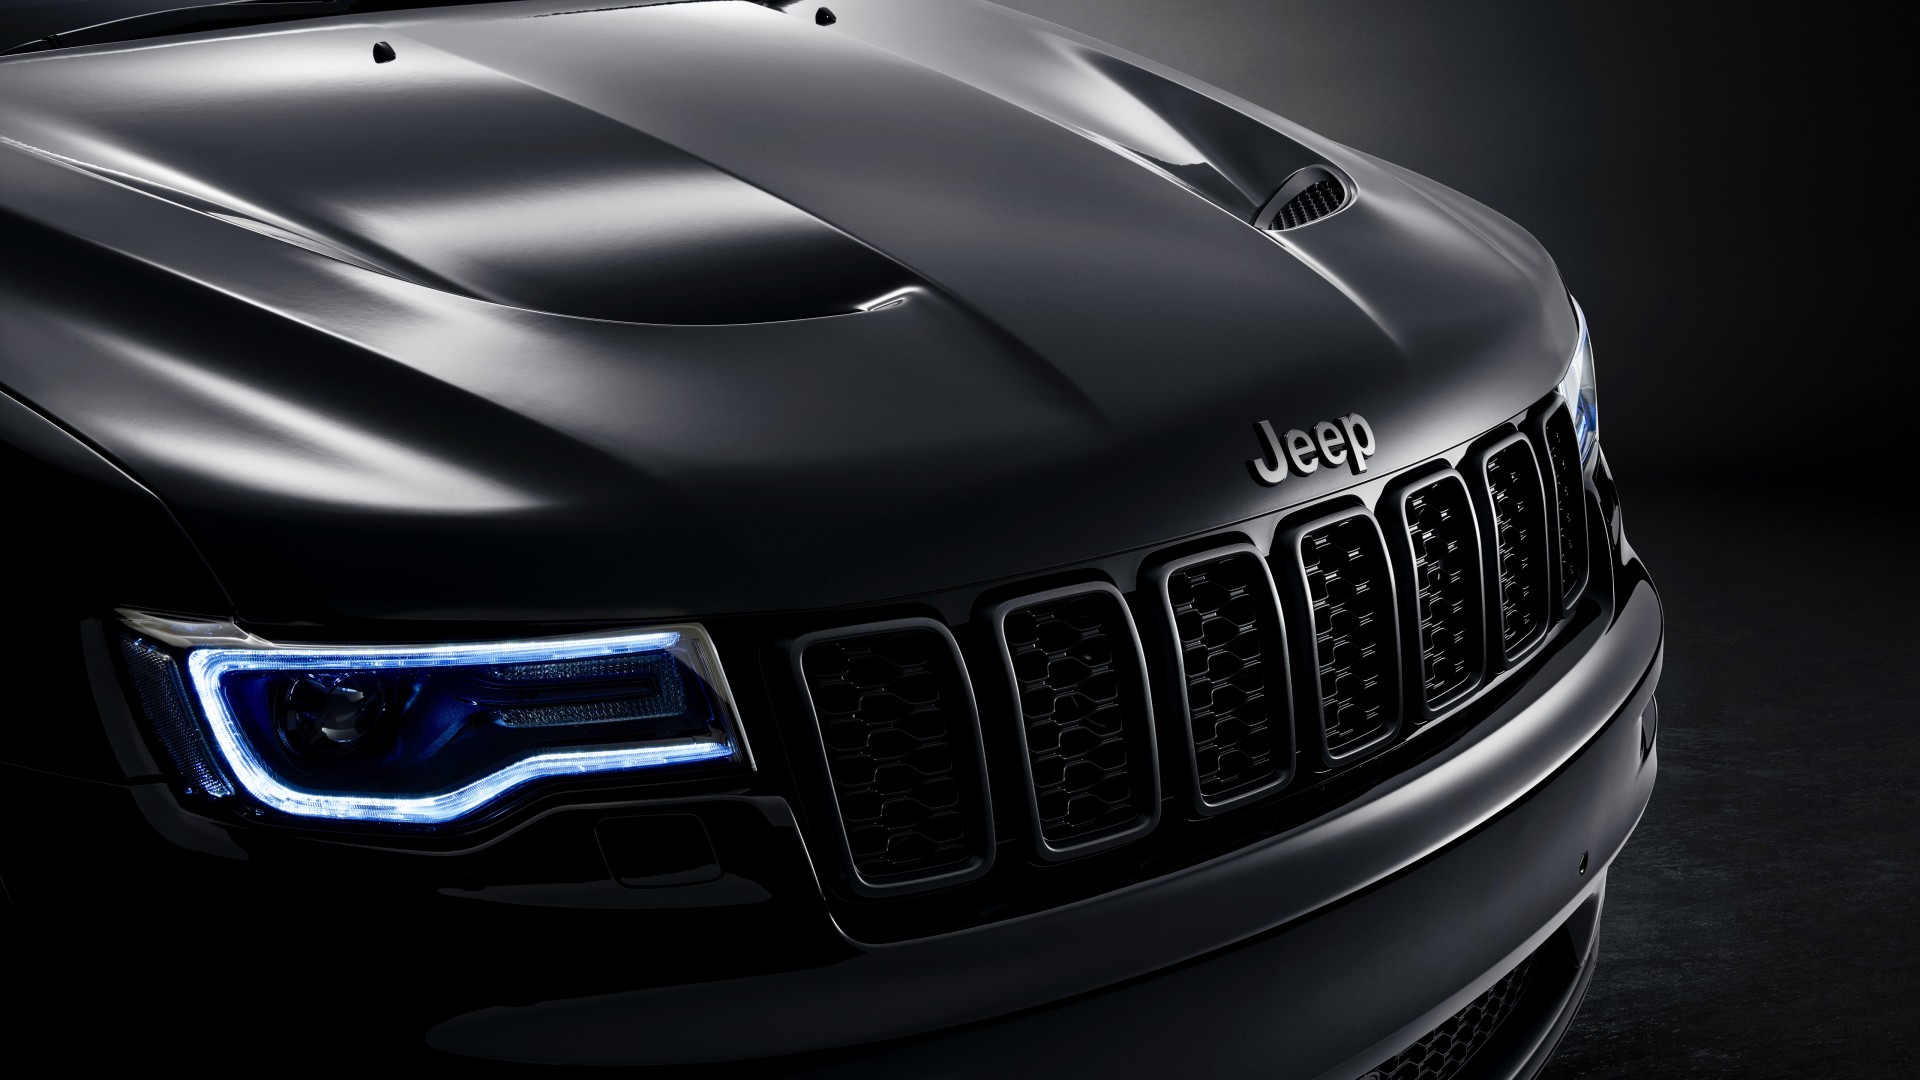 Jeep Grand Cherokee S Limited 2019 5K 2 Wallpaper | HD Car Wallpapers